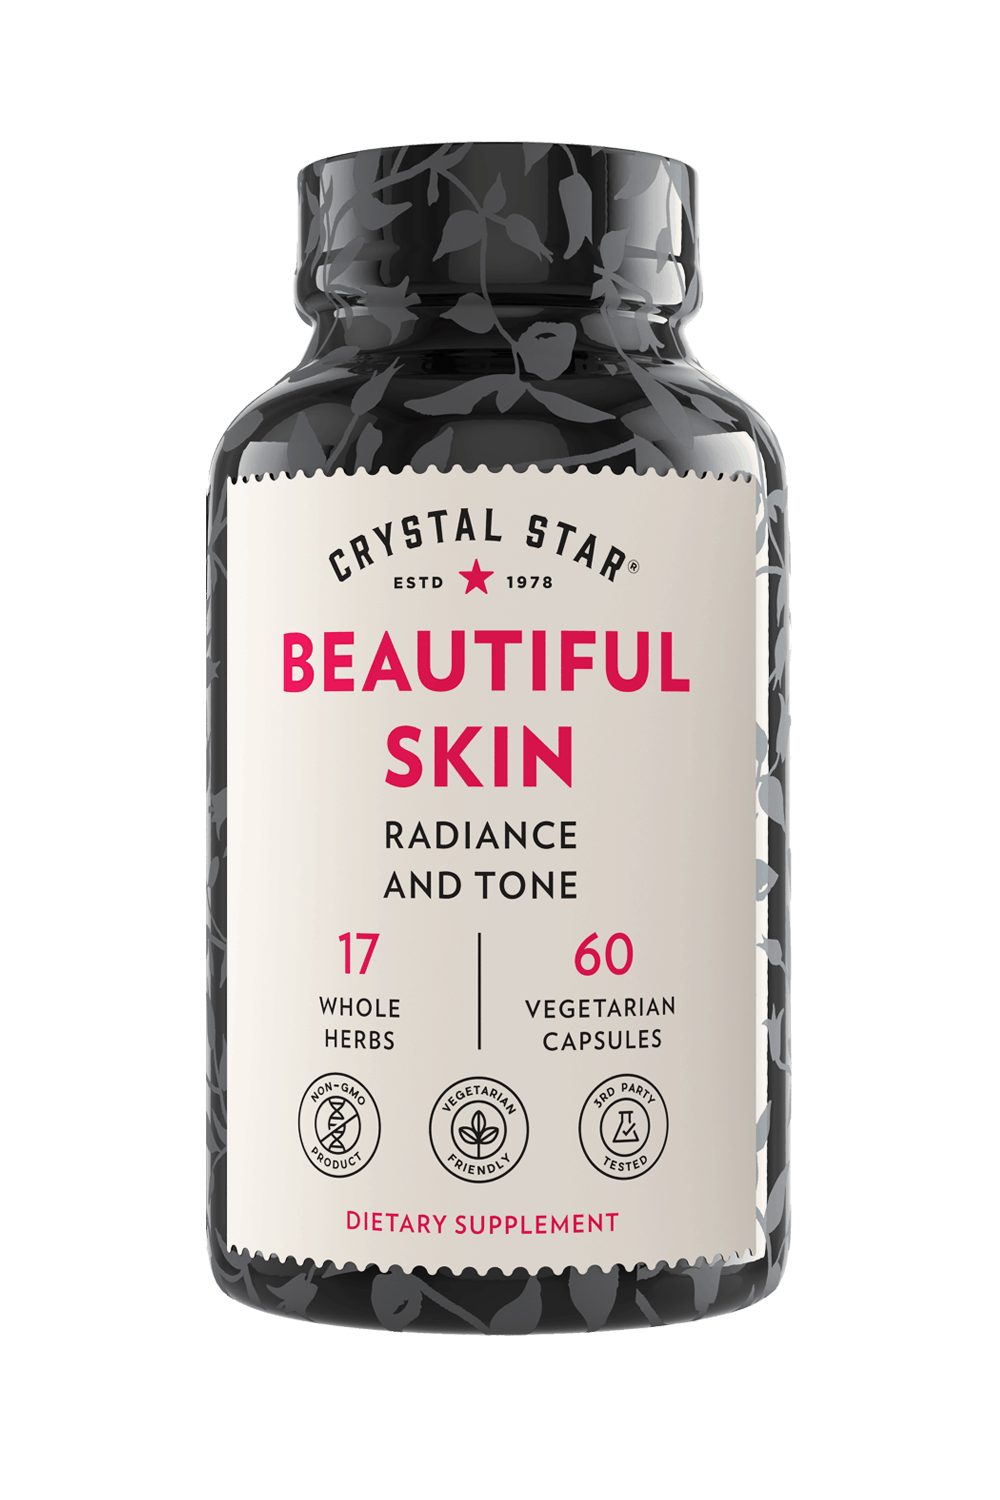 Crystal Star Beautiful Skin, beautiful skin, collagen, cell regeneration, moisturizing, signs of aging, aging skin, wrinkles, sagging skin, dimples, cell turnover, biotin, collagen, collagen powder, collagen supplement, wrinkle cream, hand cream, crepey skin, Crepe erase, body lotion, hand lotion, face cream, skin supplement, hyaluronic acid, HA, supplement for skin health, beauty supplement, fine lines and wrinkles